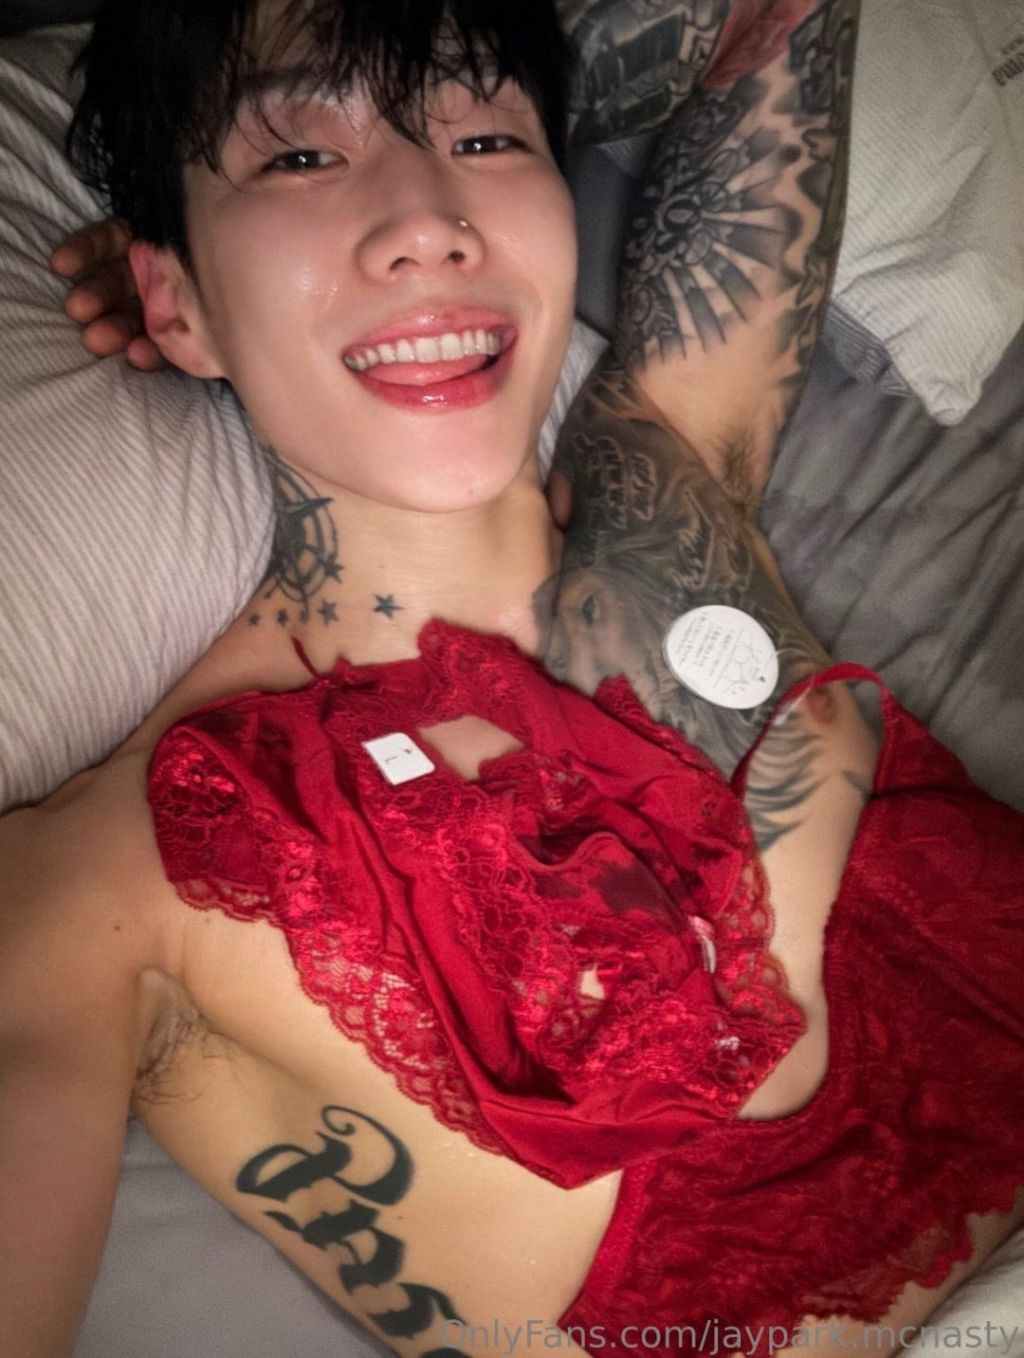 Jay Park was the first K-pop member to open an OnlyFans account.